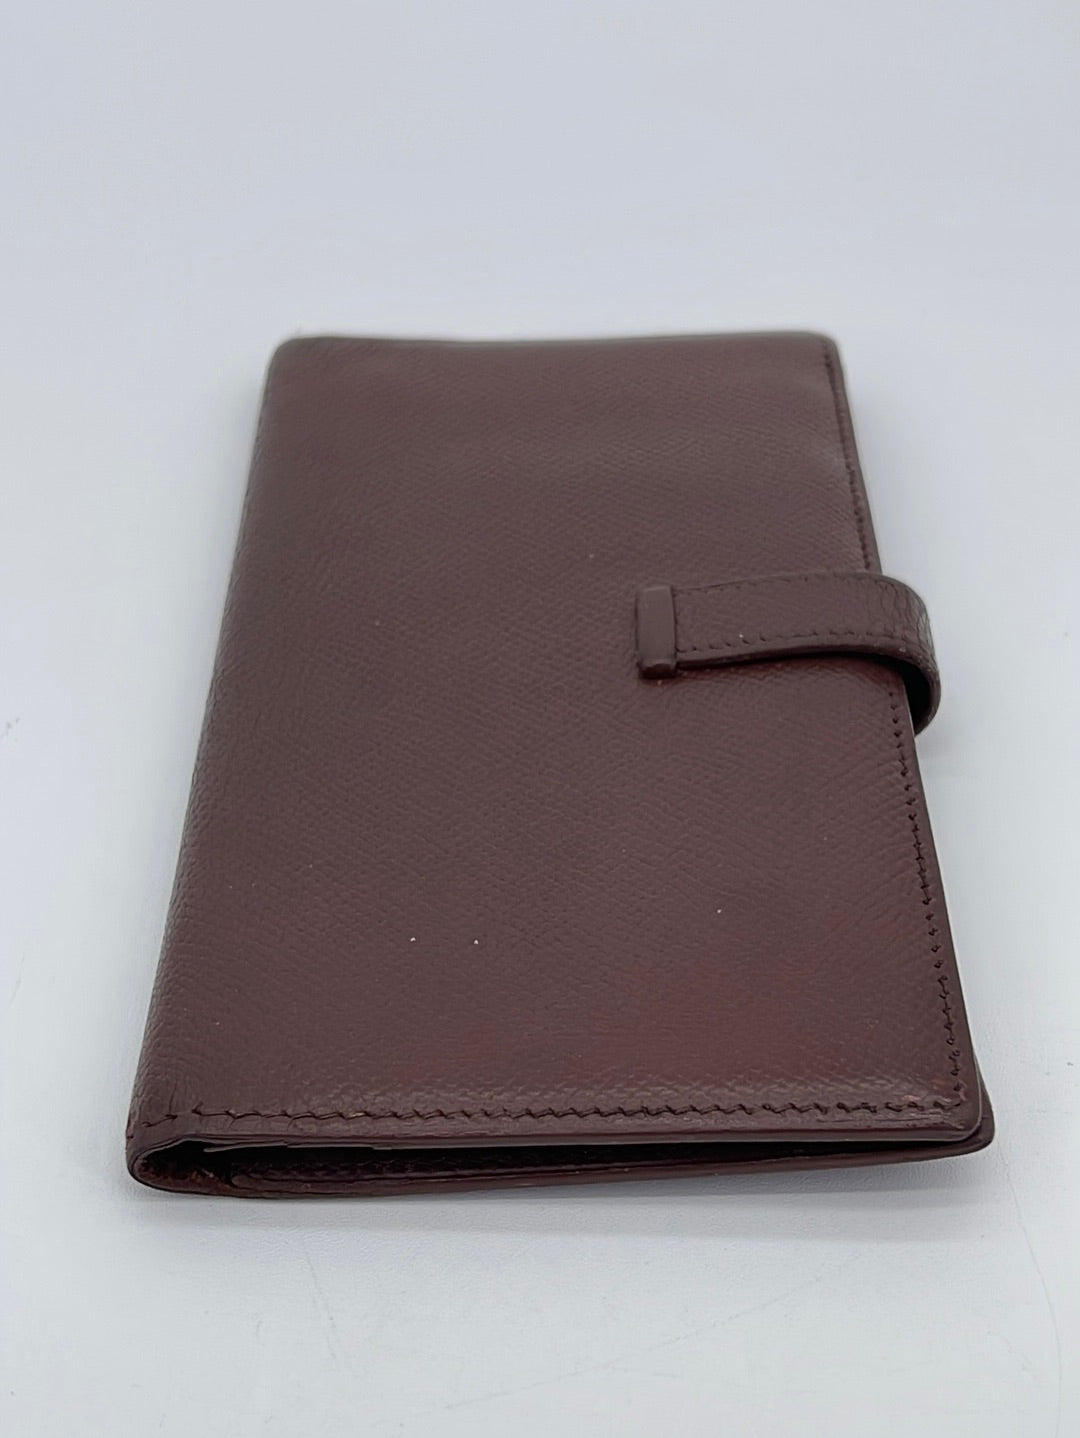 HERMES Bearn Chevre Leather Long Bifold Wallet Brown Beautifu condition F/S